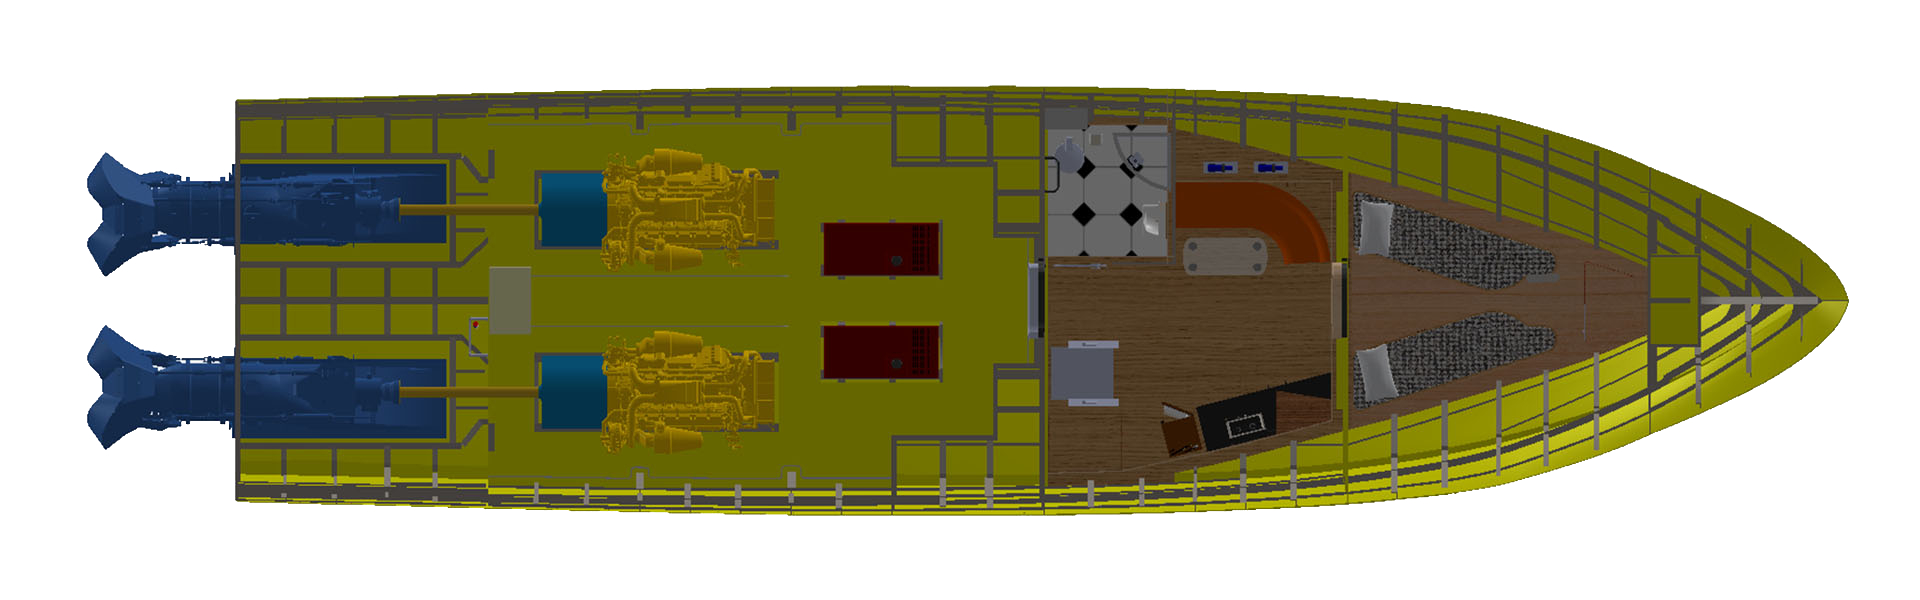 Equipment Arrangement of a Pilot Boat that was entirely designed at Conceptia.